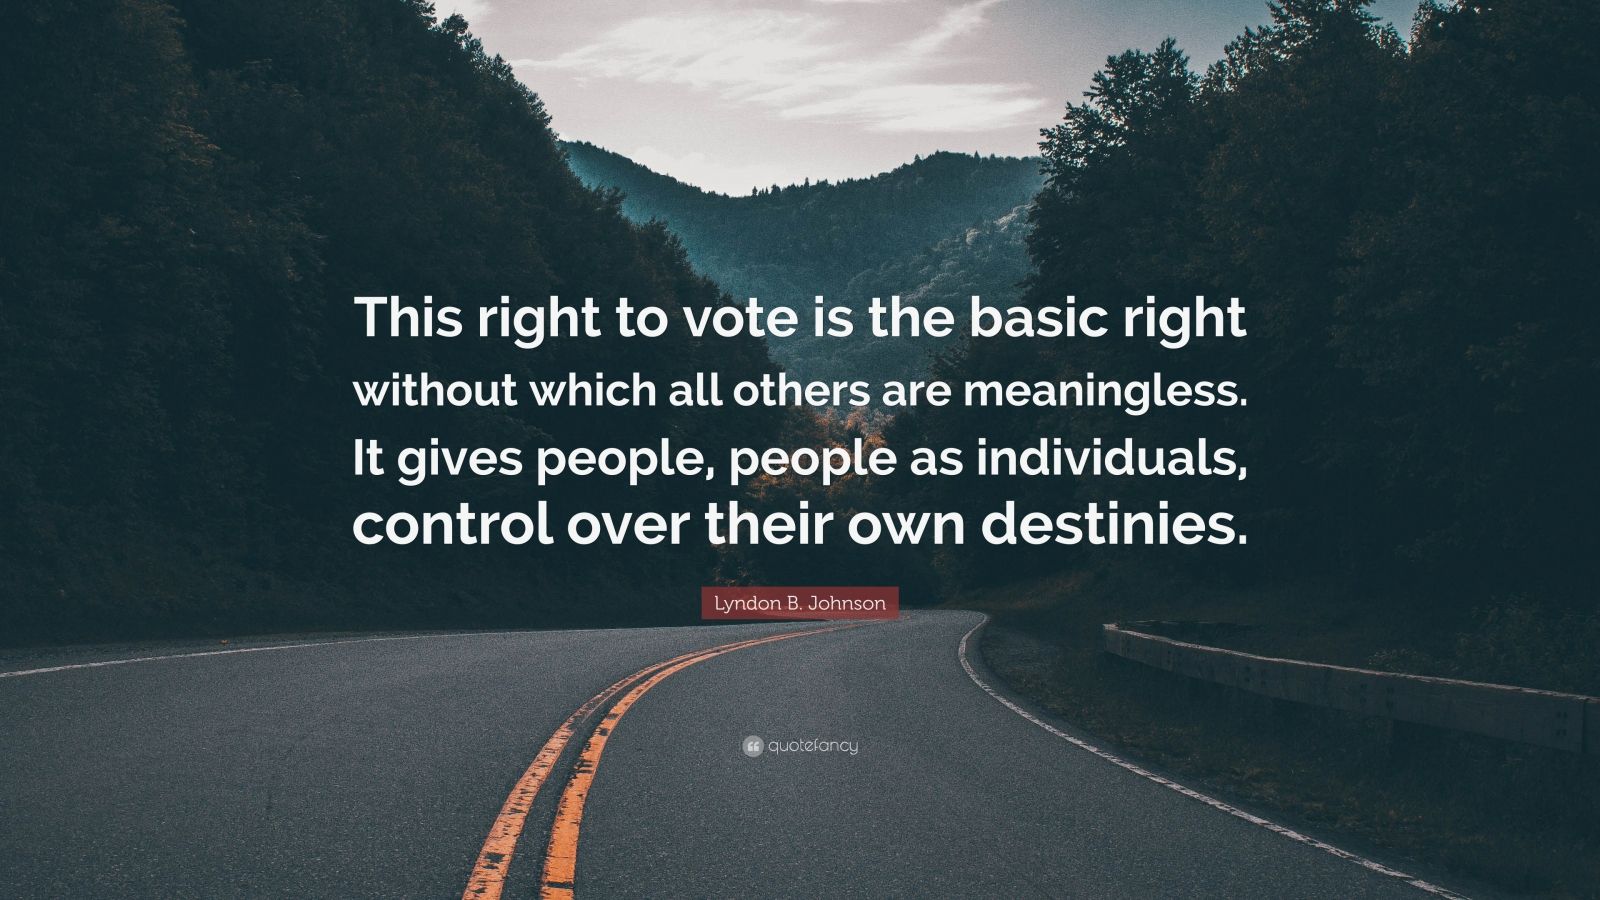 lyndon-b-johnson-quote-this-right-to-vote-is-the-basic-right-without-which-all-others-are